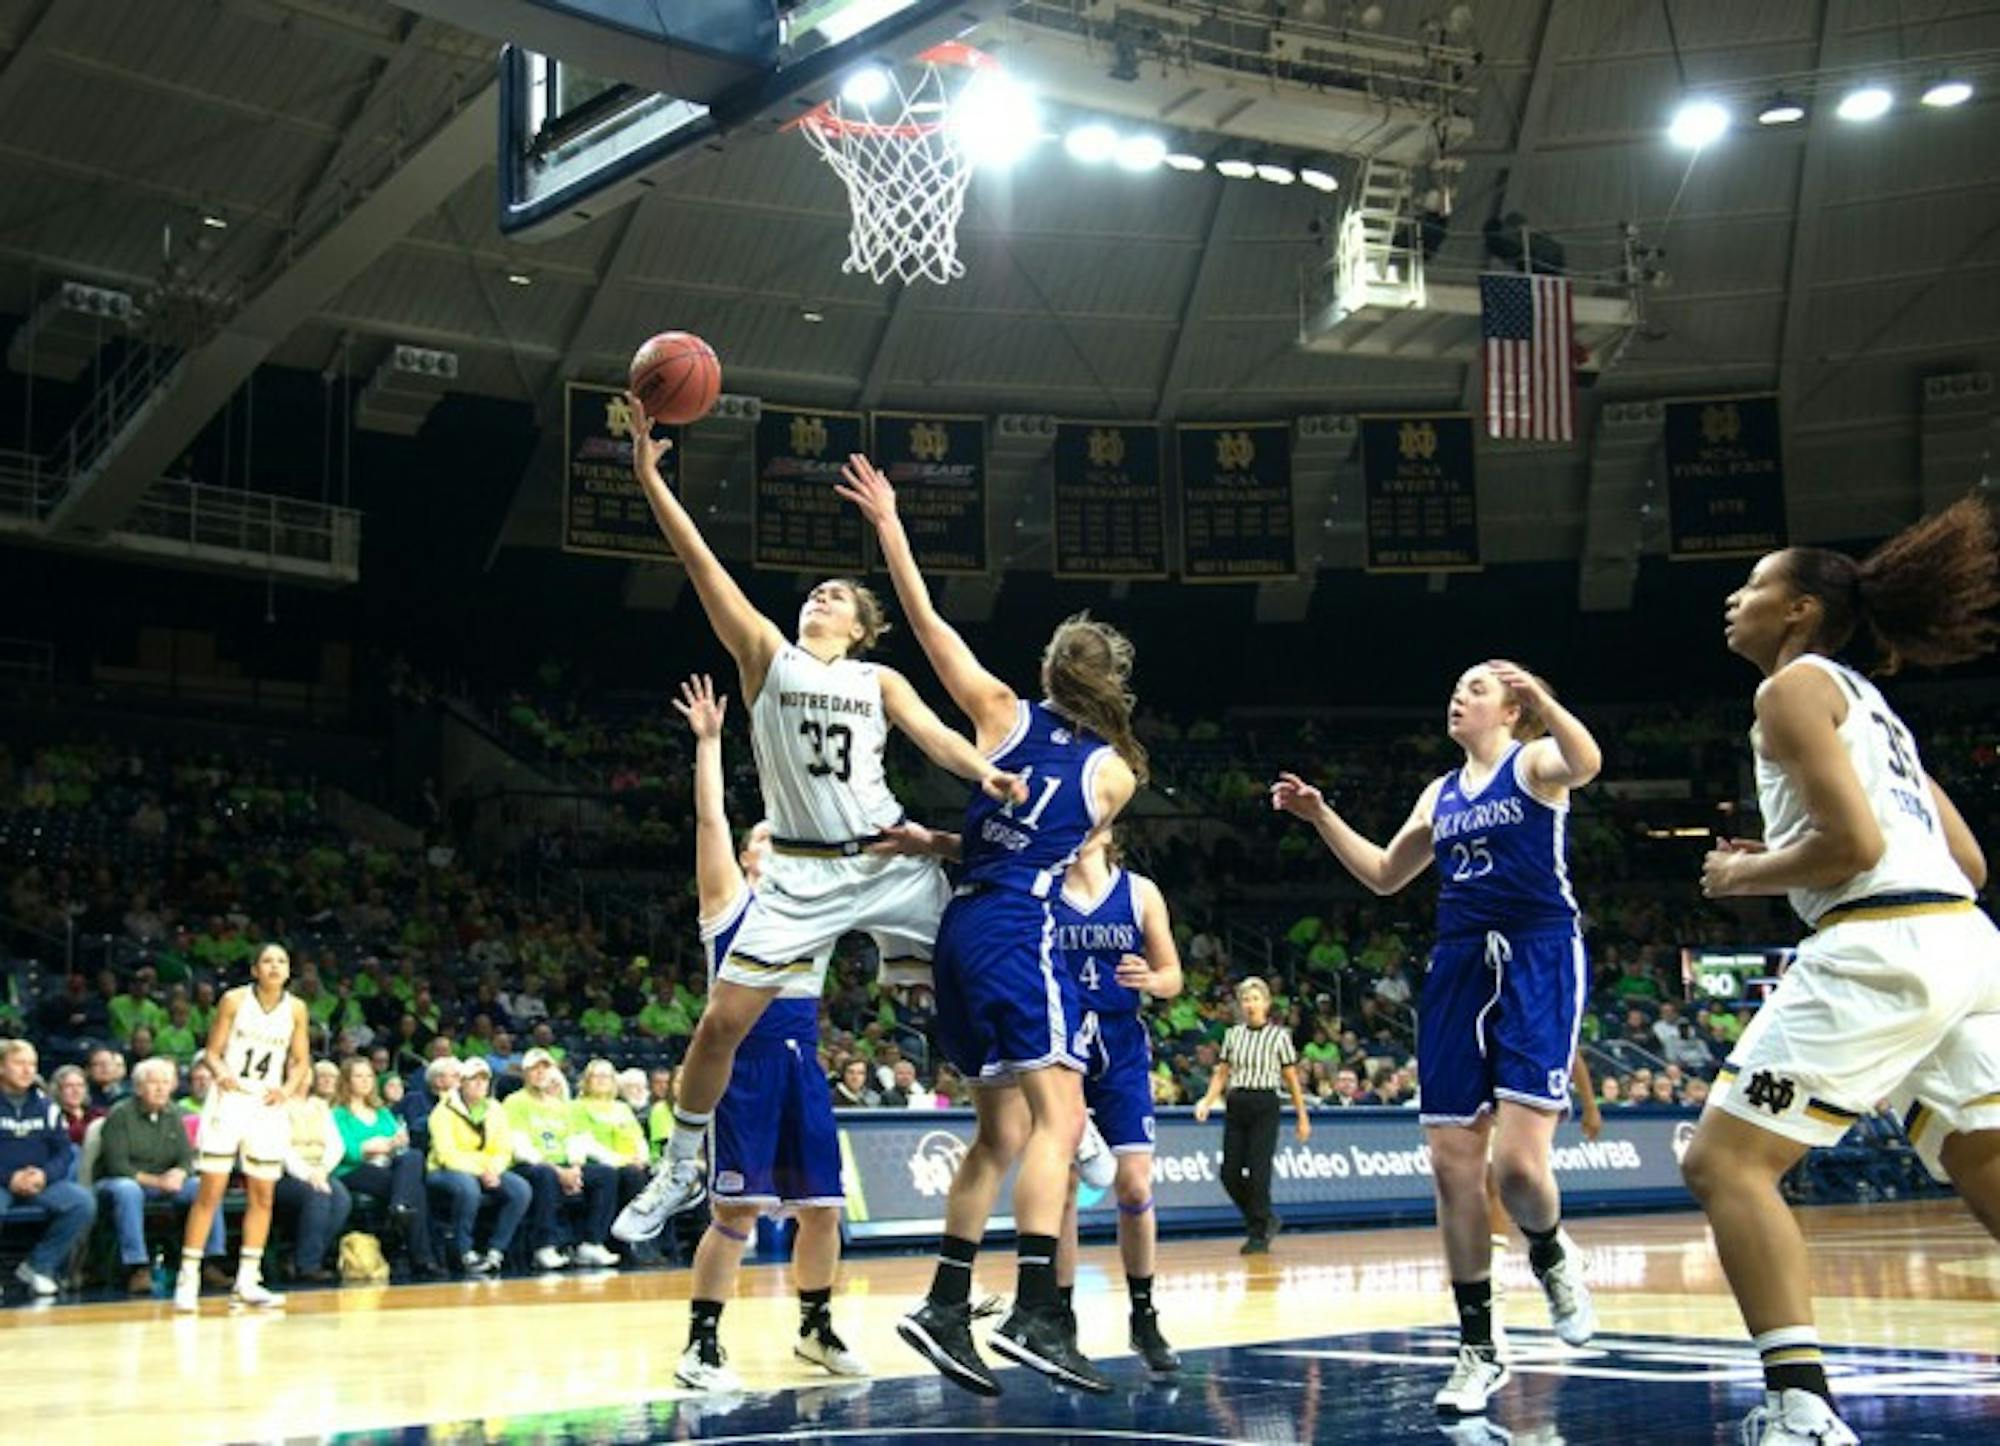 Notre Dame freshman forward Kathryn Westbeld drives inside for a shot against Holy Cross in a 104-29 defeat of Holy Cross on Nov. 23.